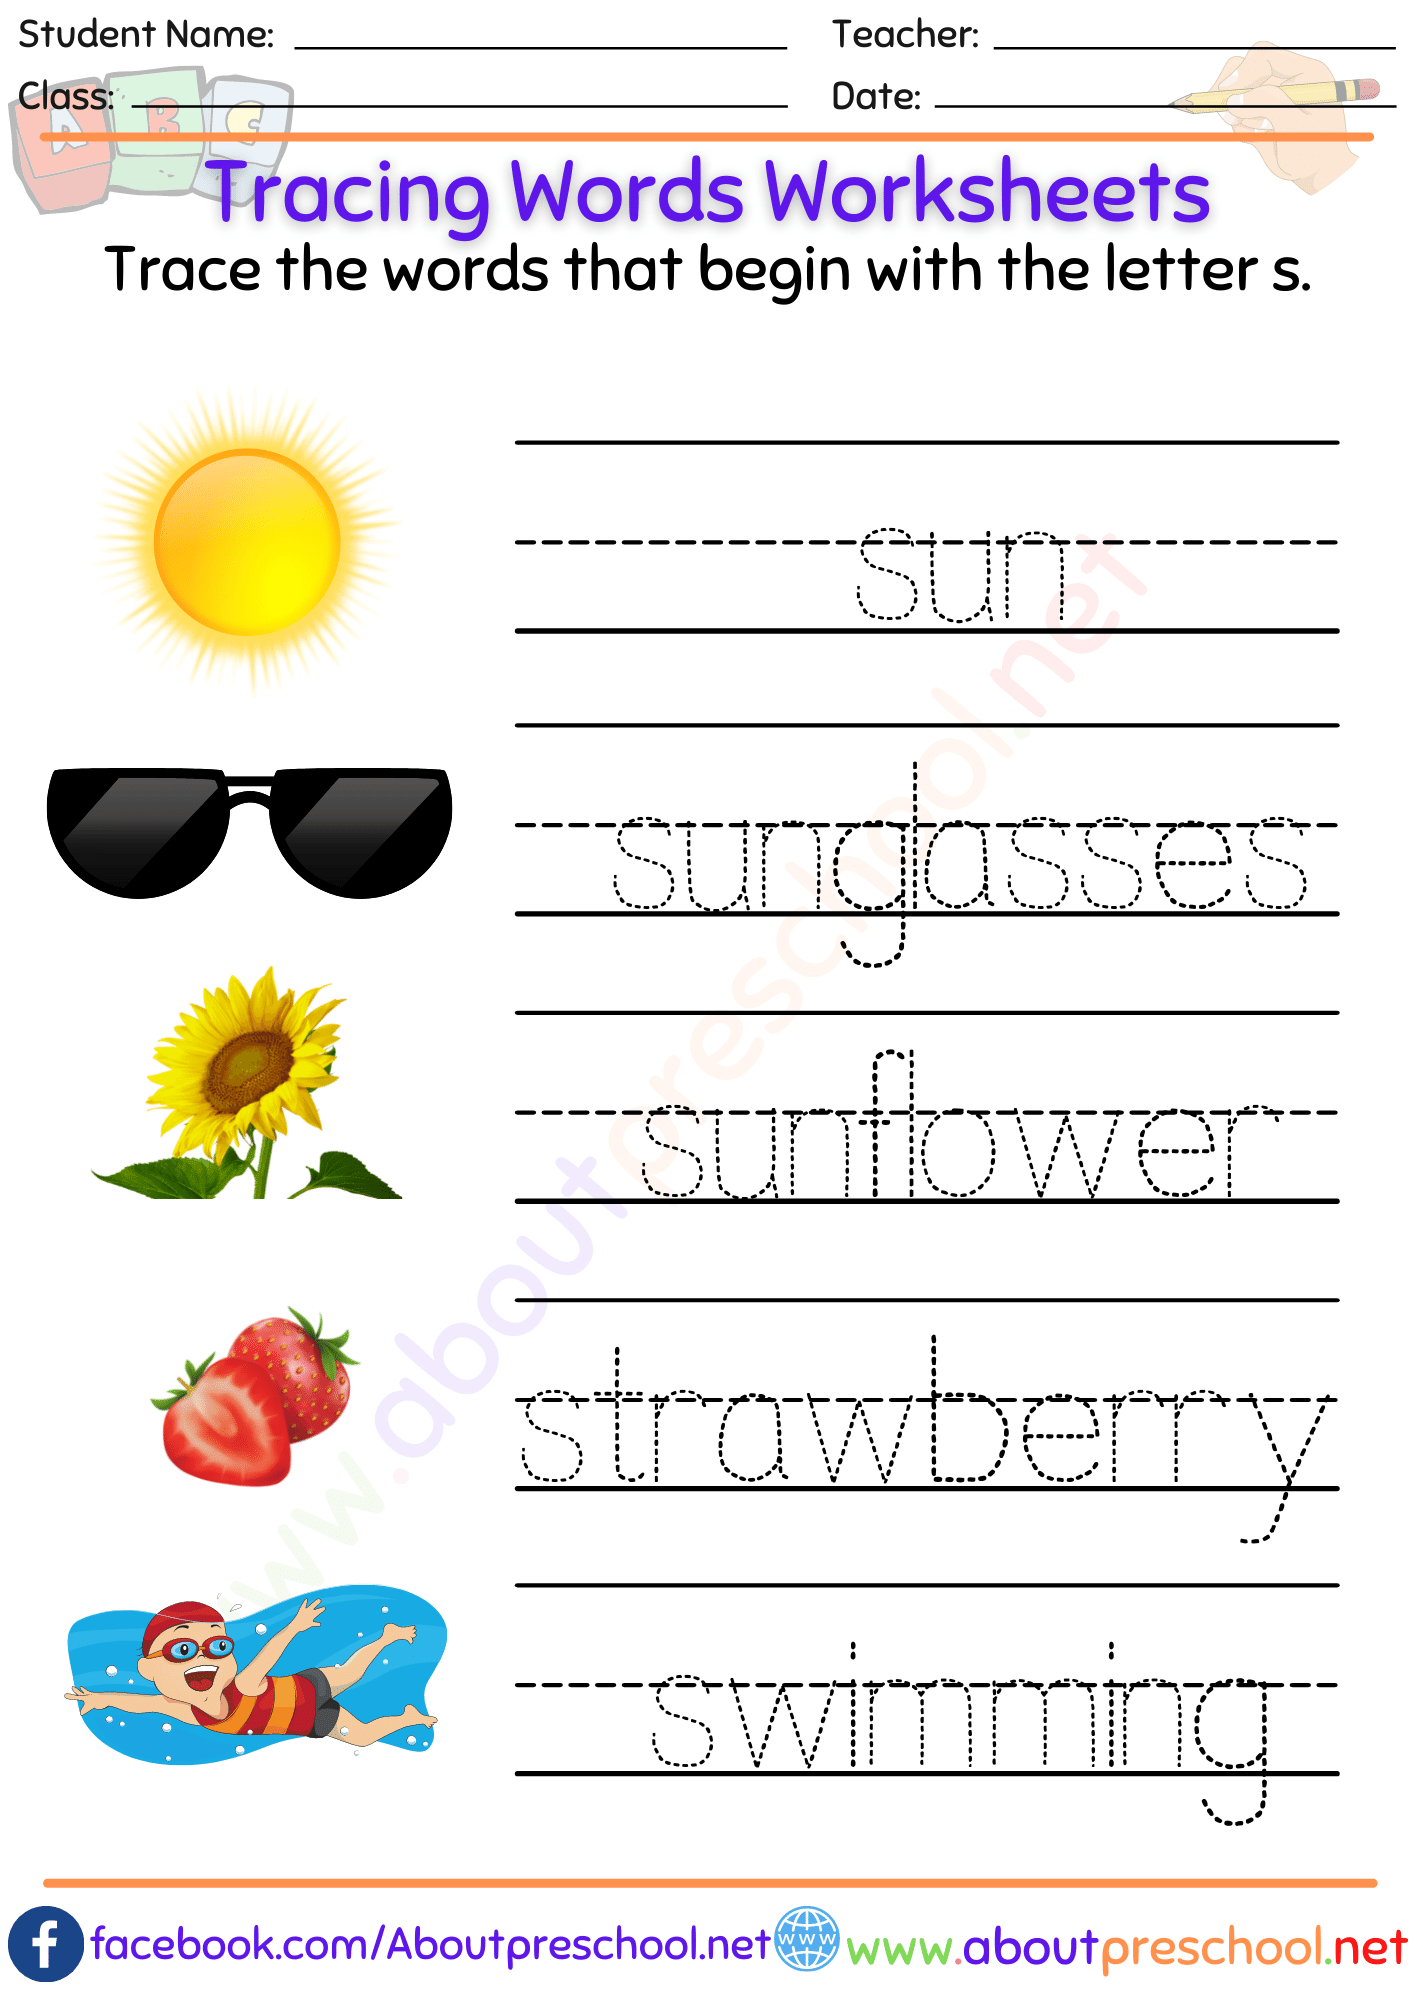 Tracing Words Worksheets-s